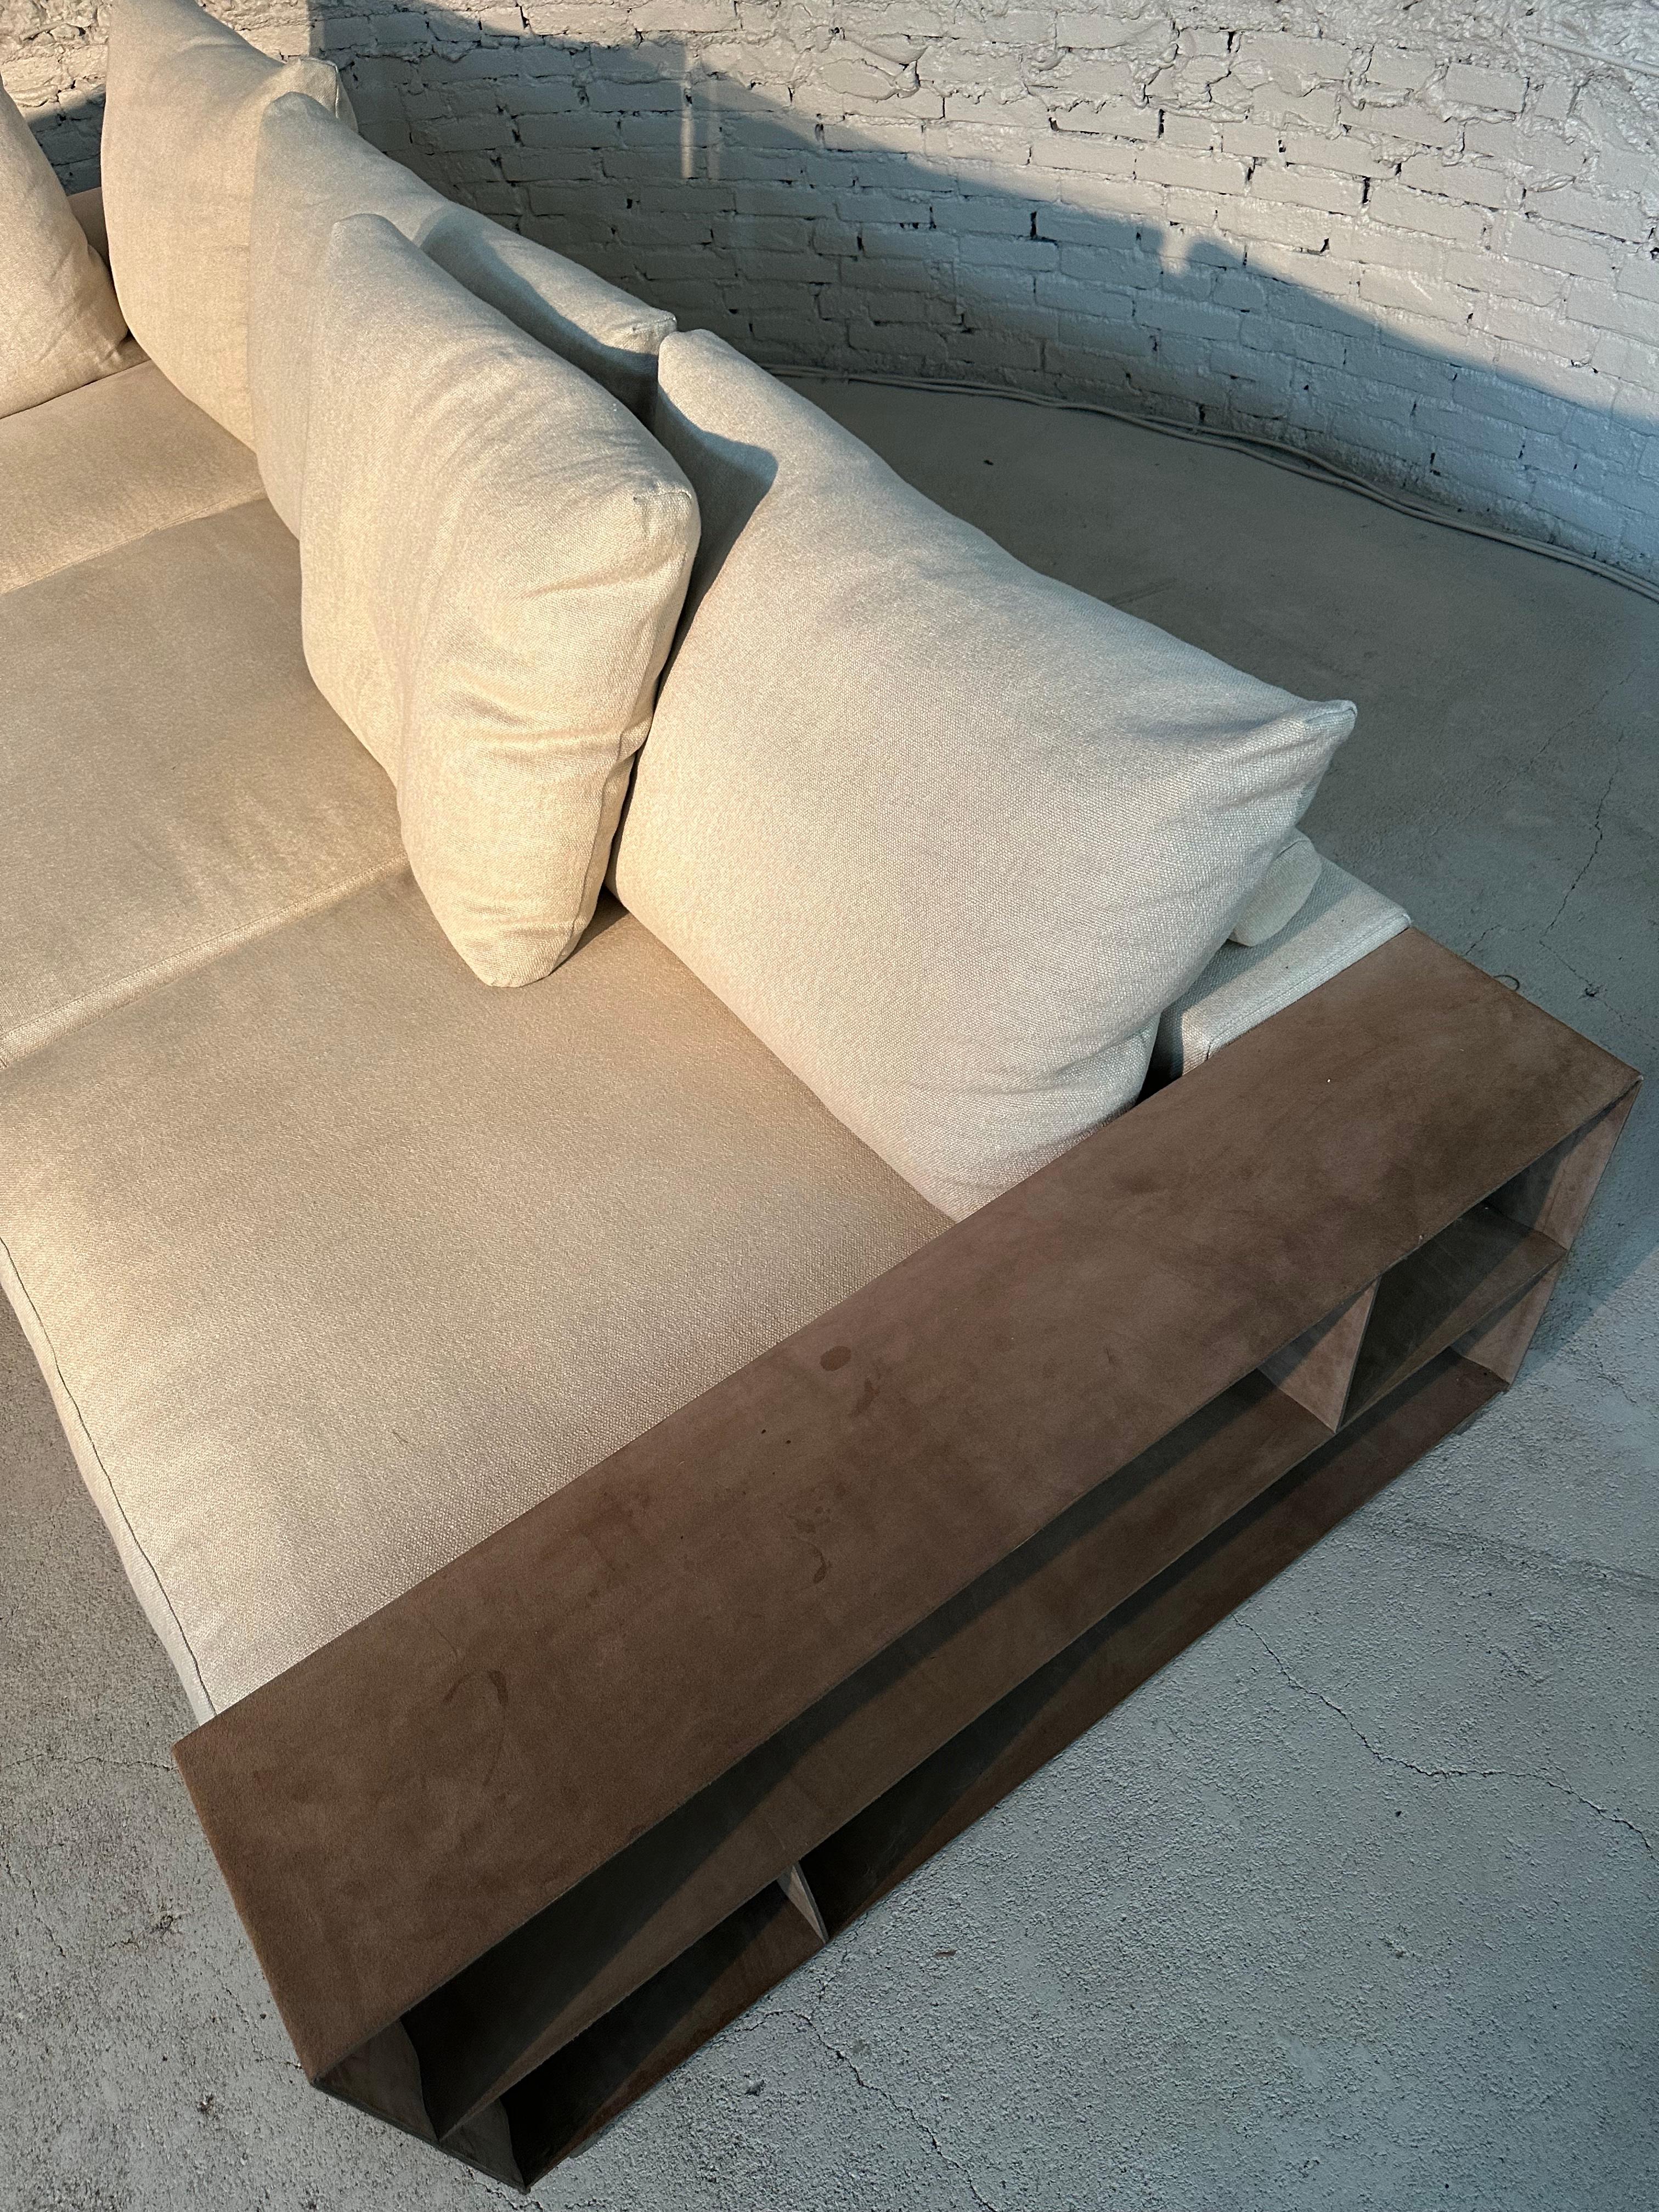 The Flexform Groundpiece sofa is a design by Antonio Citterio and it symbolizes the ultimate Flexform comfort. This is one of the most well-known icons inside their collection. Antonio Citterio emerged modern simplicity, art and comfort with this